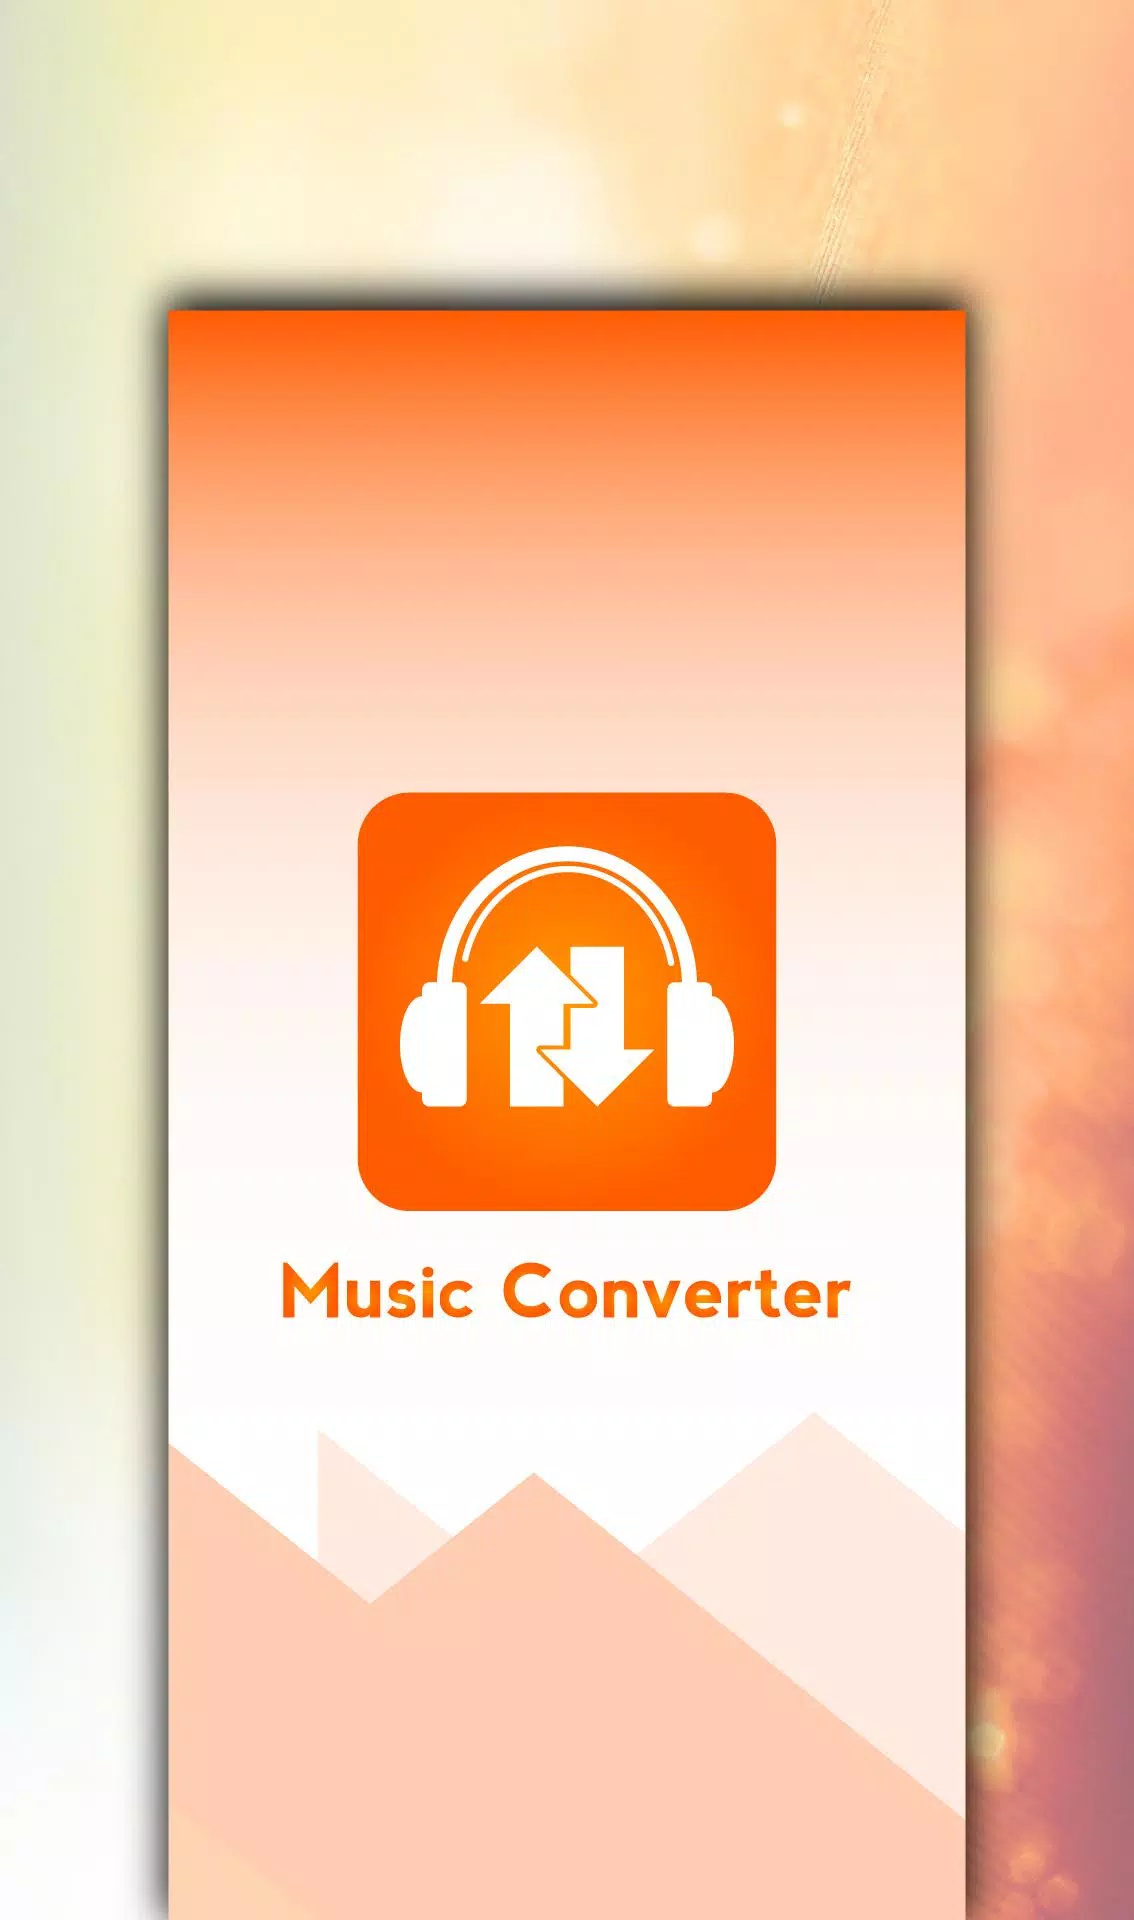 All Audio Converter – MP3, AAC, WAV, M4A, AAC for Android - APK Download